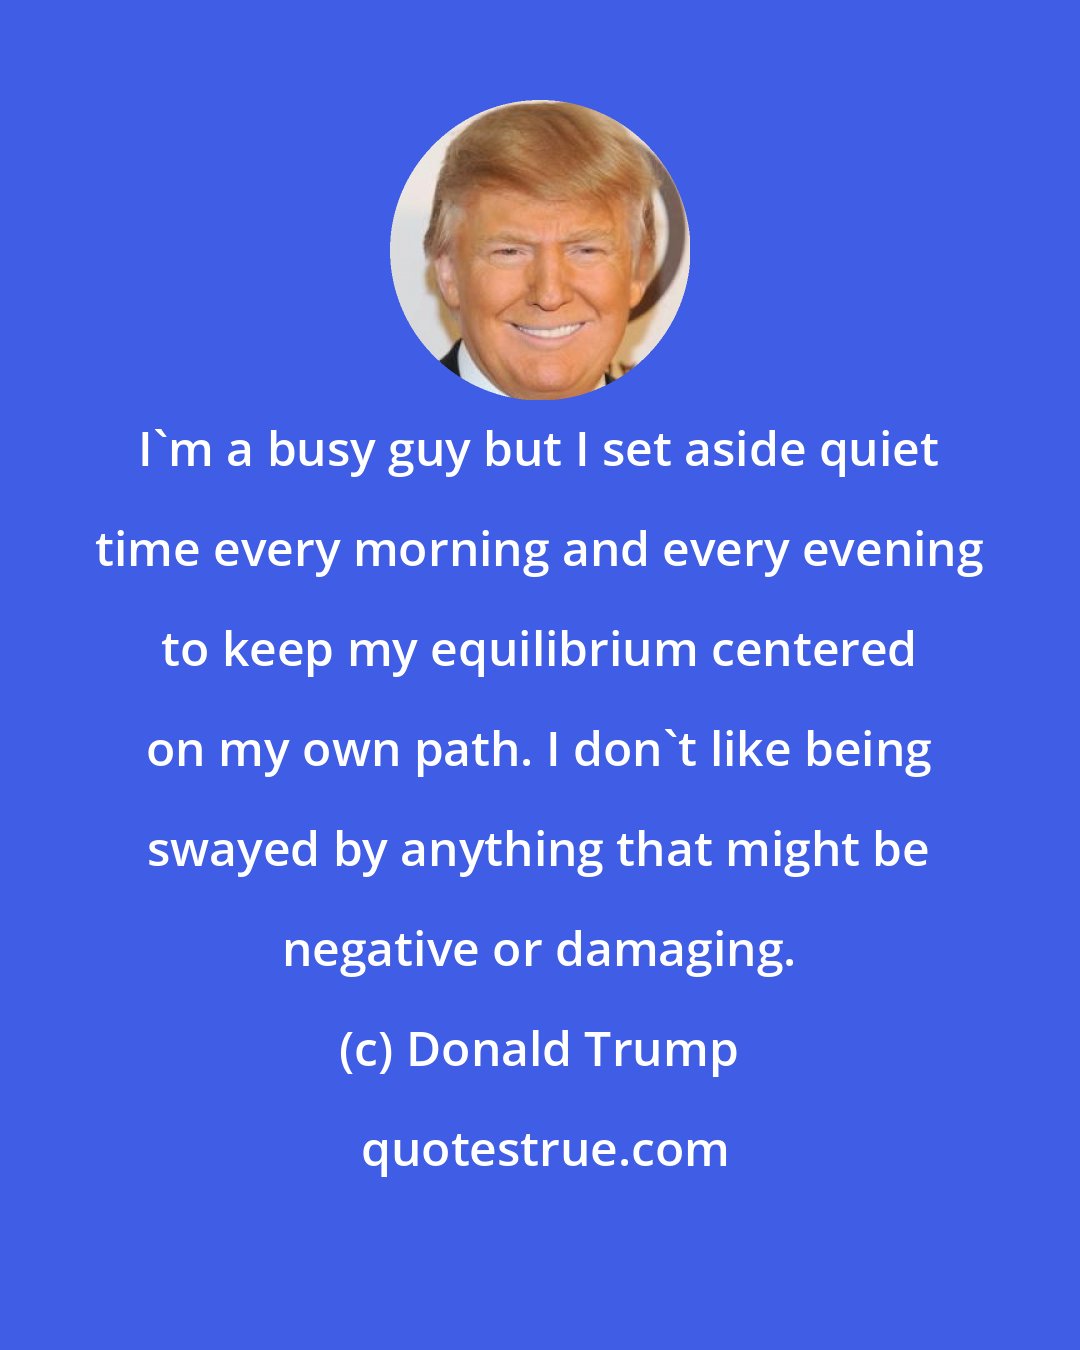 Donald Trump: I'm a busy guy but I set aside quiet time every morning and every evening to keep my equilibrium centered on my own path. I don't like being swayed by anything that might be negative or damaging.